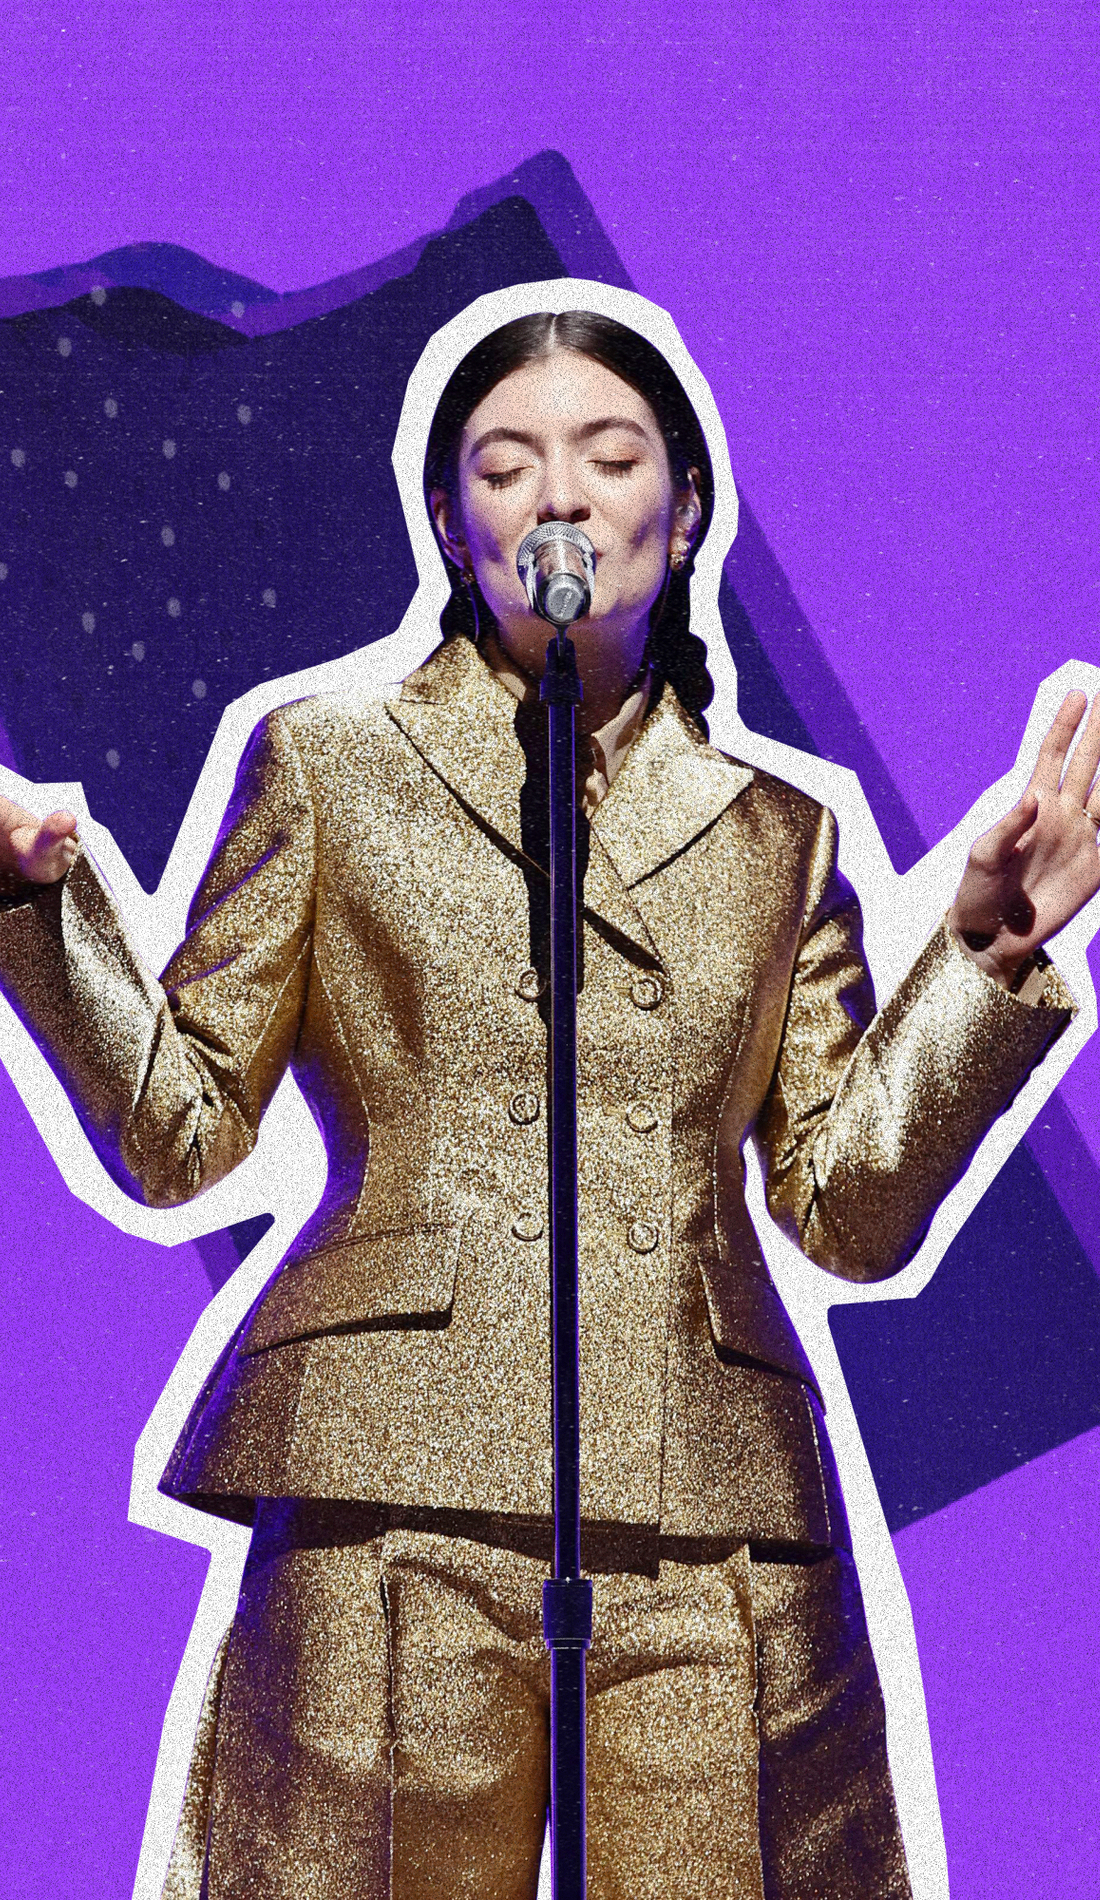 Lorde Tickets — The Solar Power Tour and Tour Dates SeatGeek